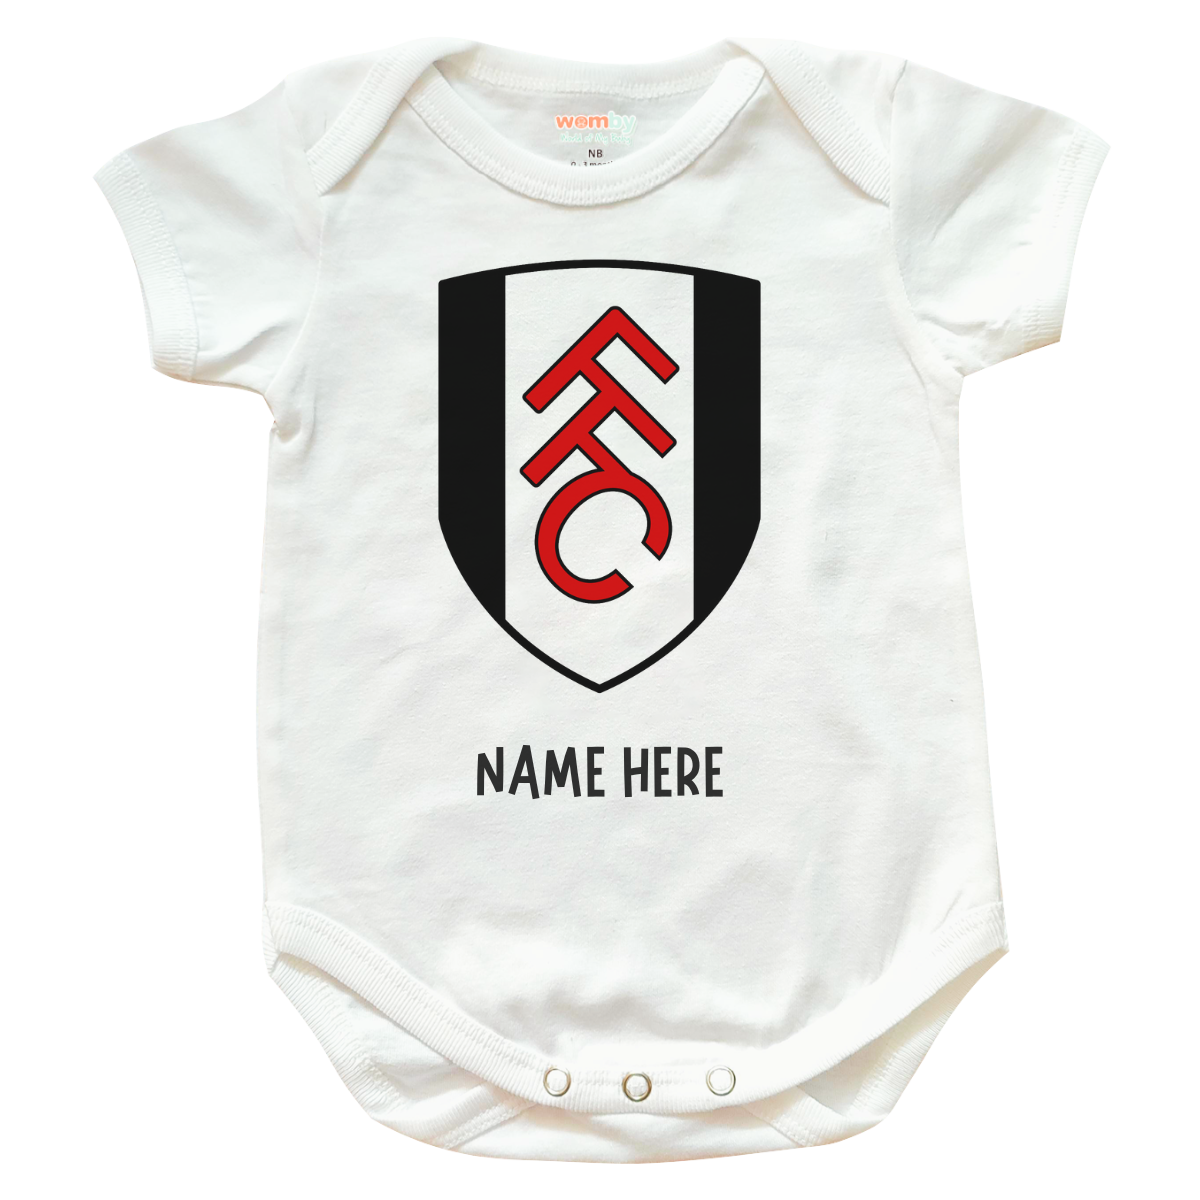 Fulham Football Team Baby Rompers Full Cotton - White